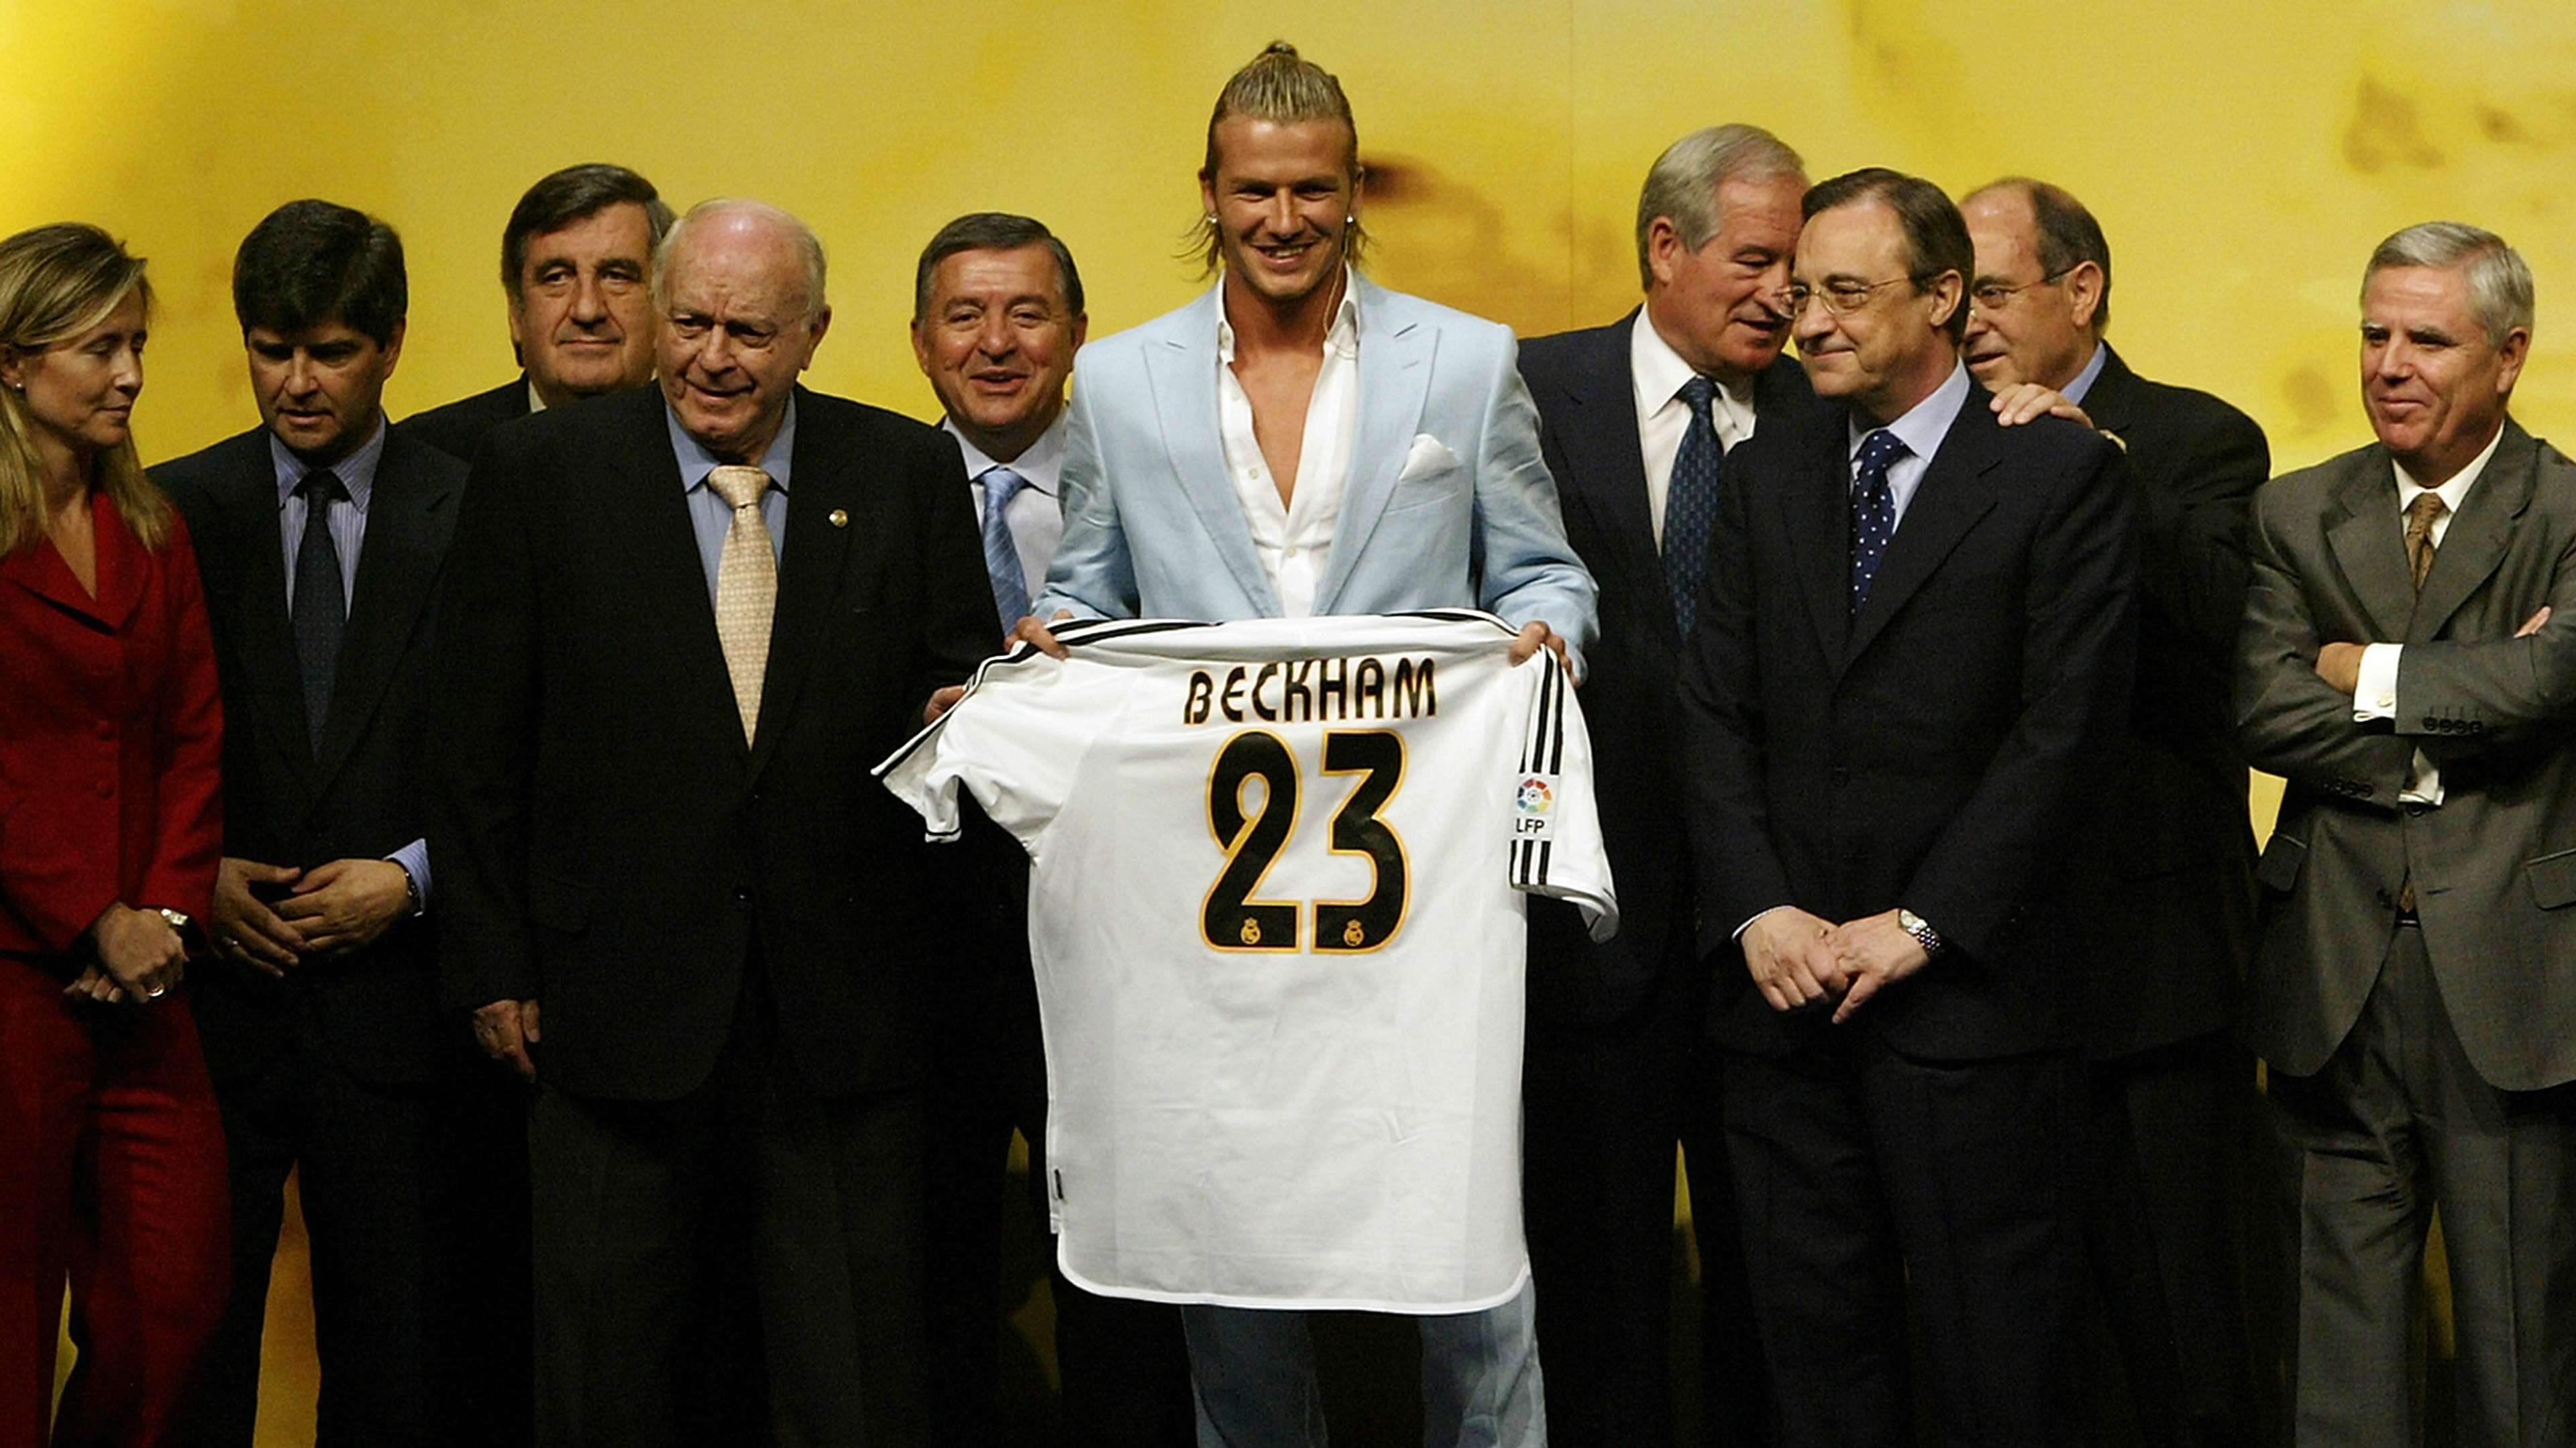 David Beckham Real Madrid official unveiling press conference 2003